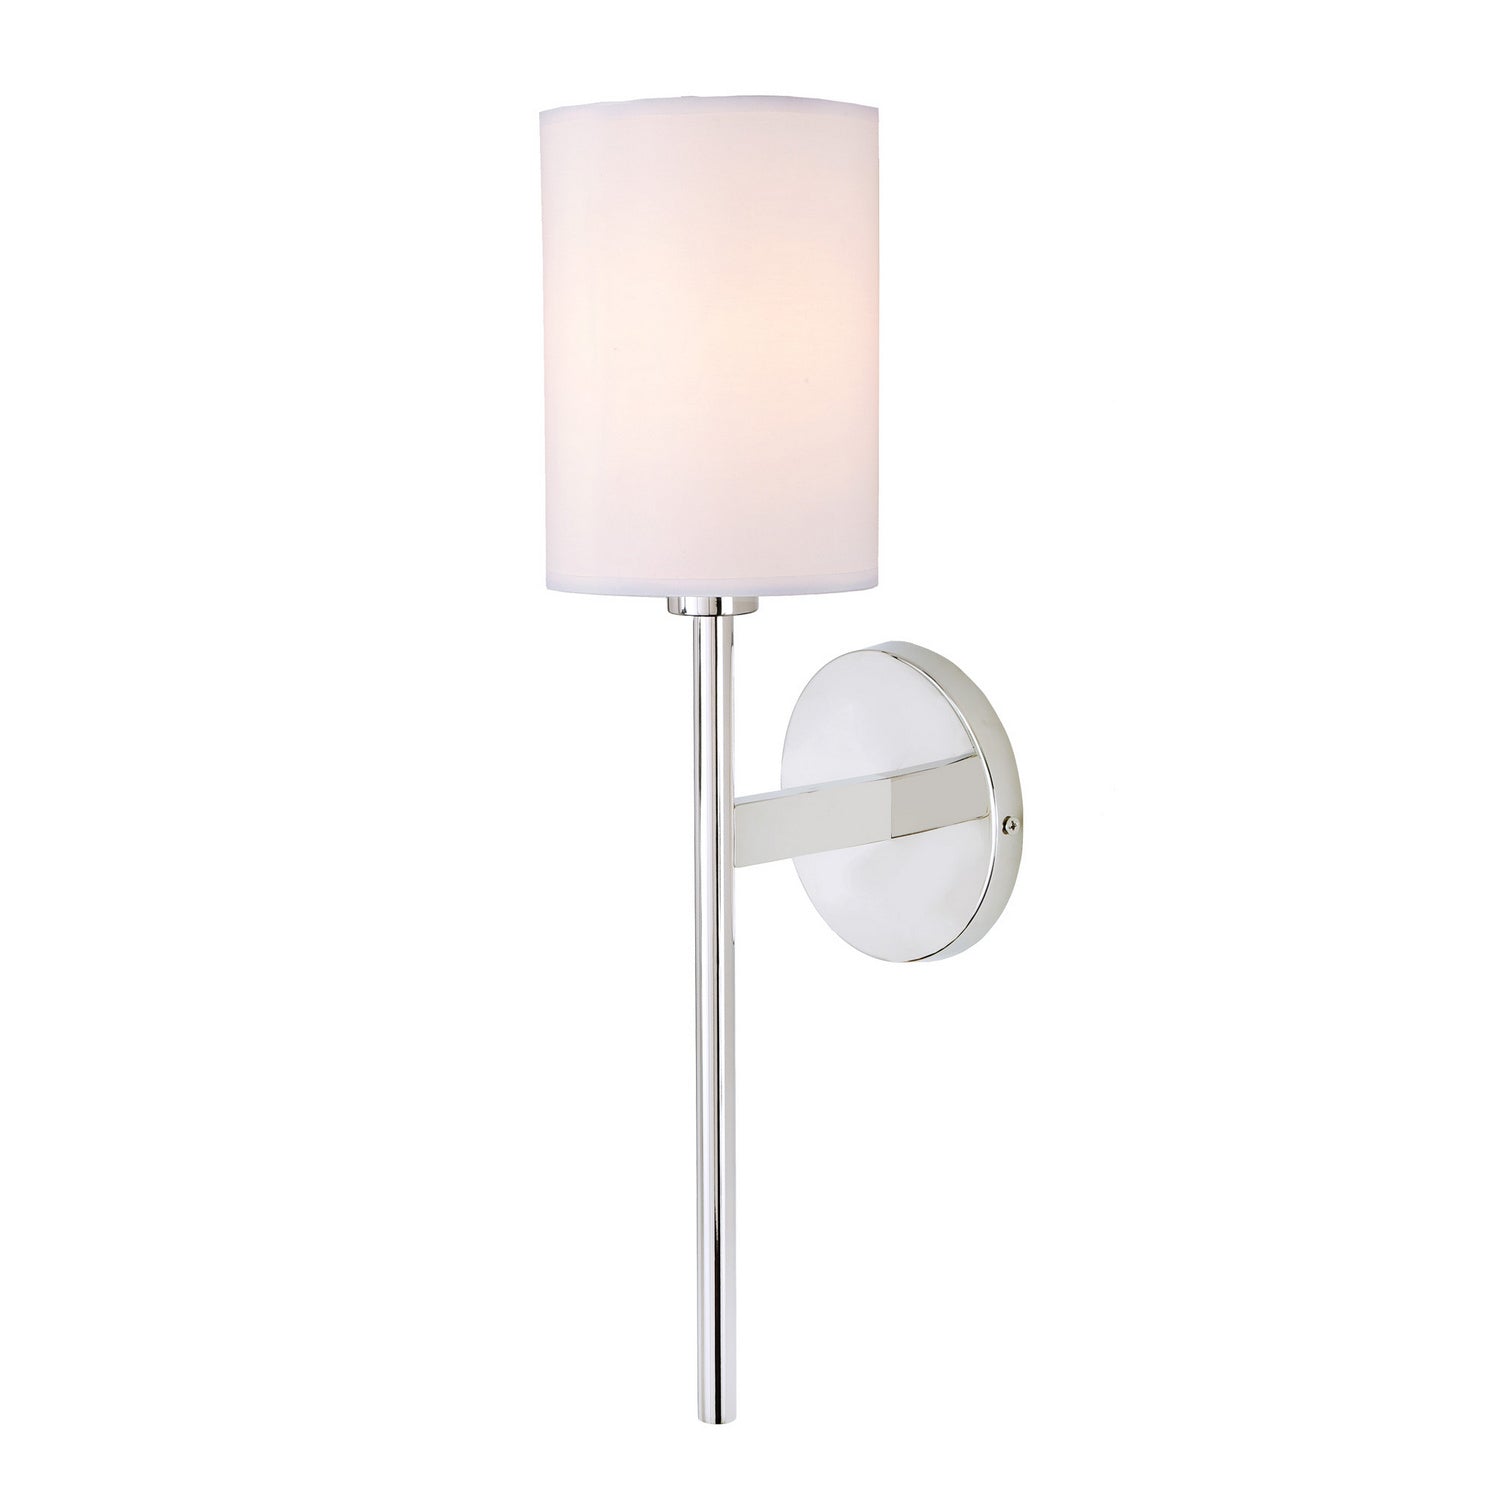 JVI Designs - 535-15 - One Light Wall Sconce - Larchmont - Polished Nickel